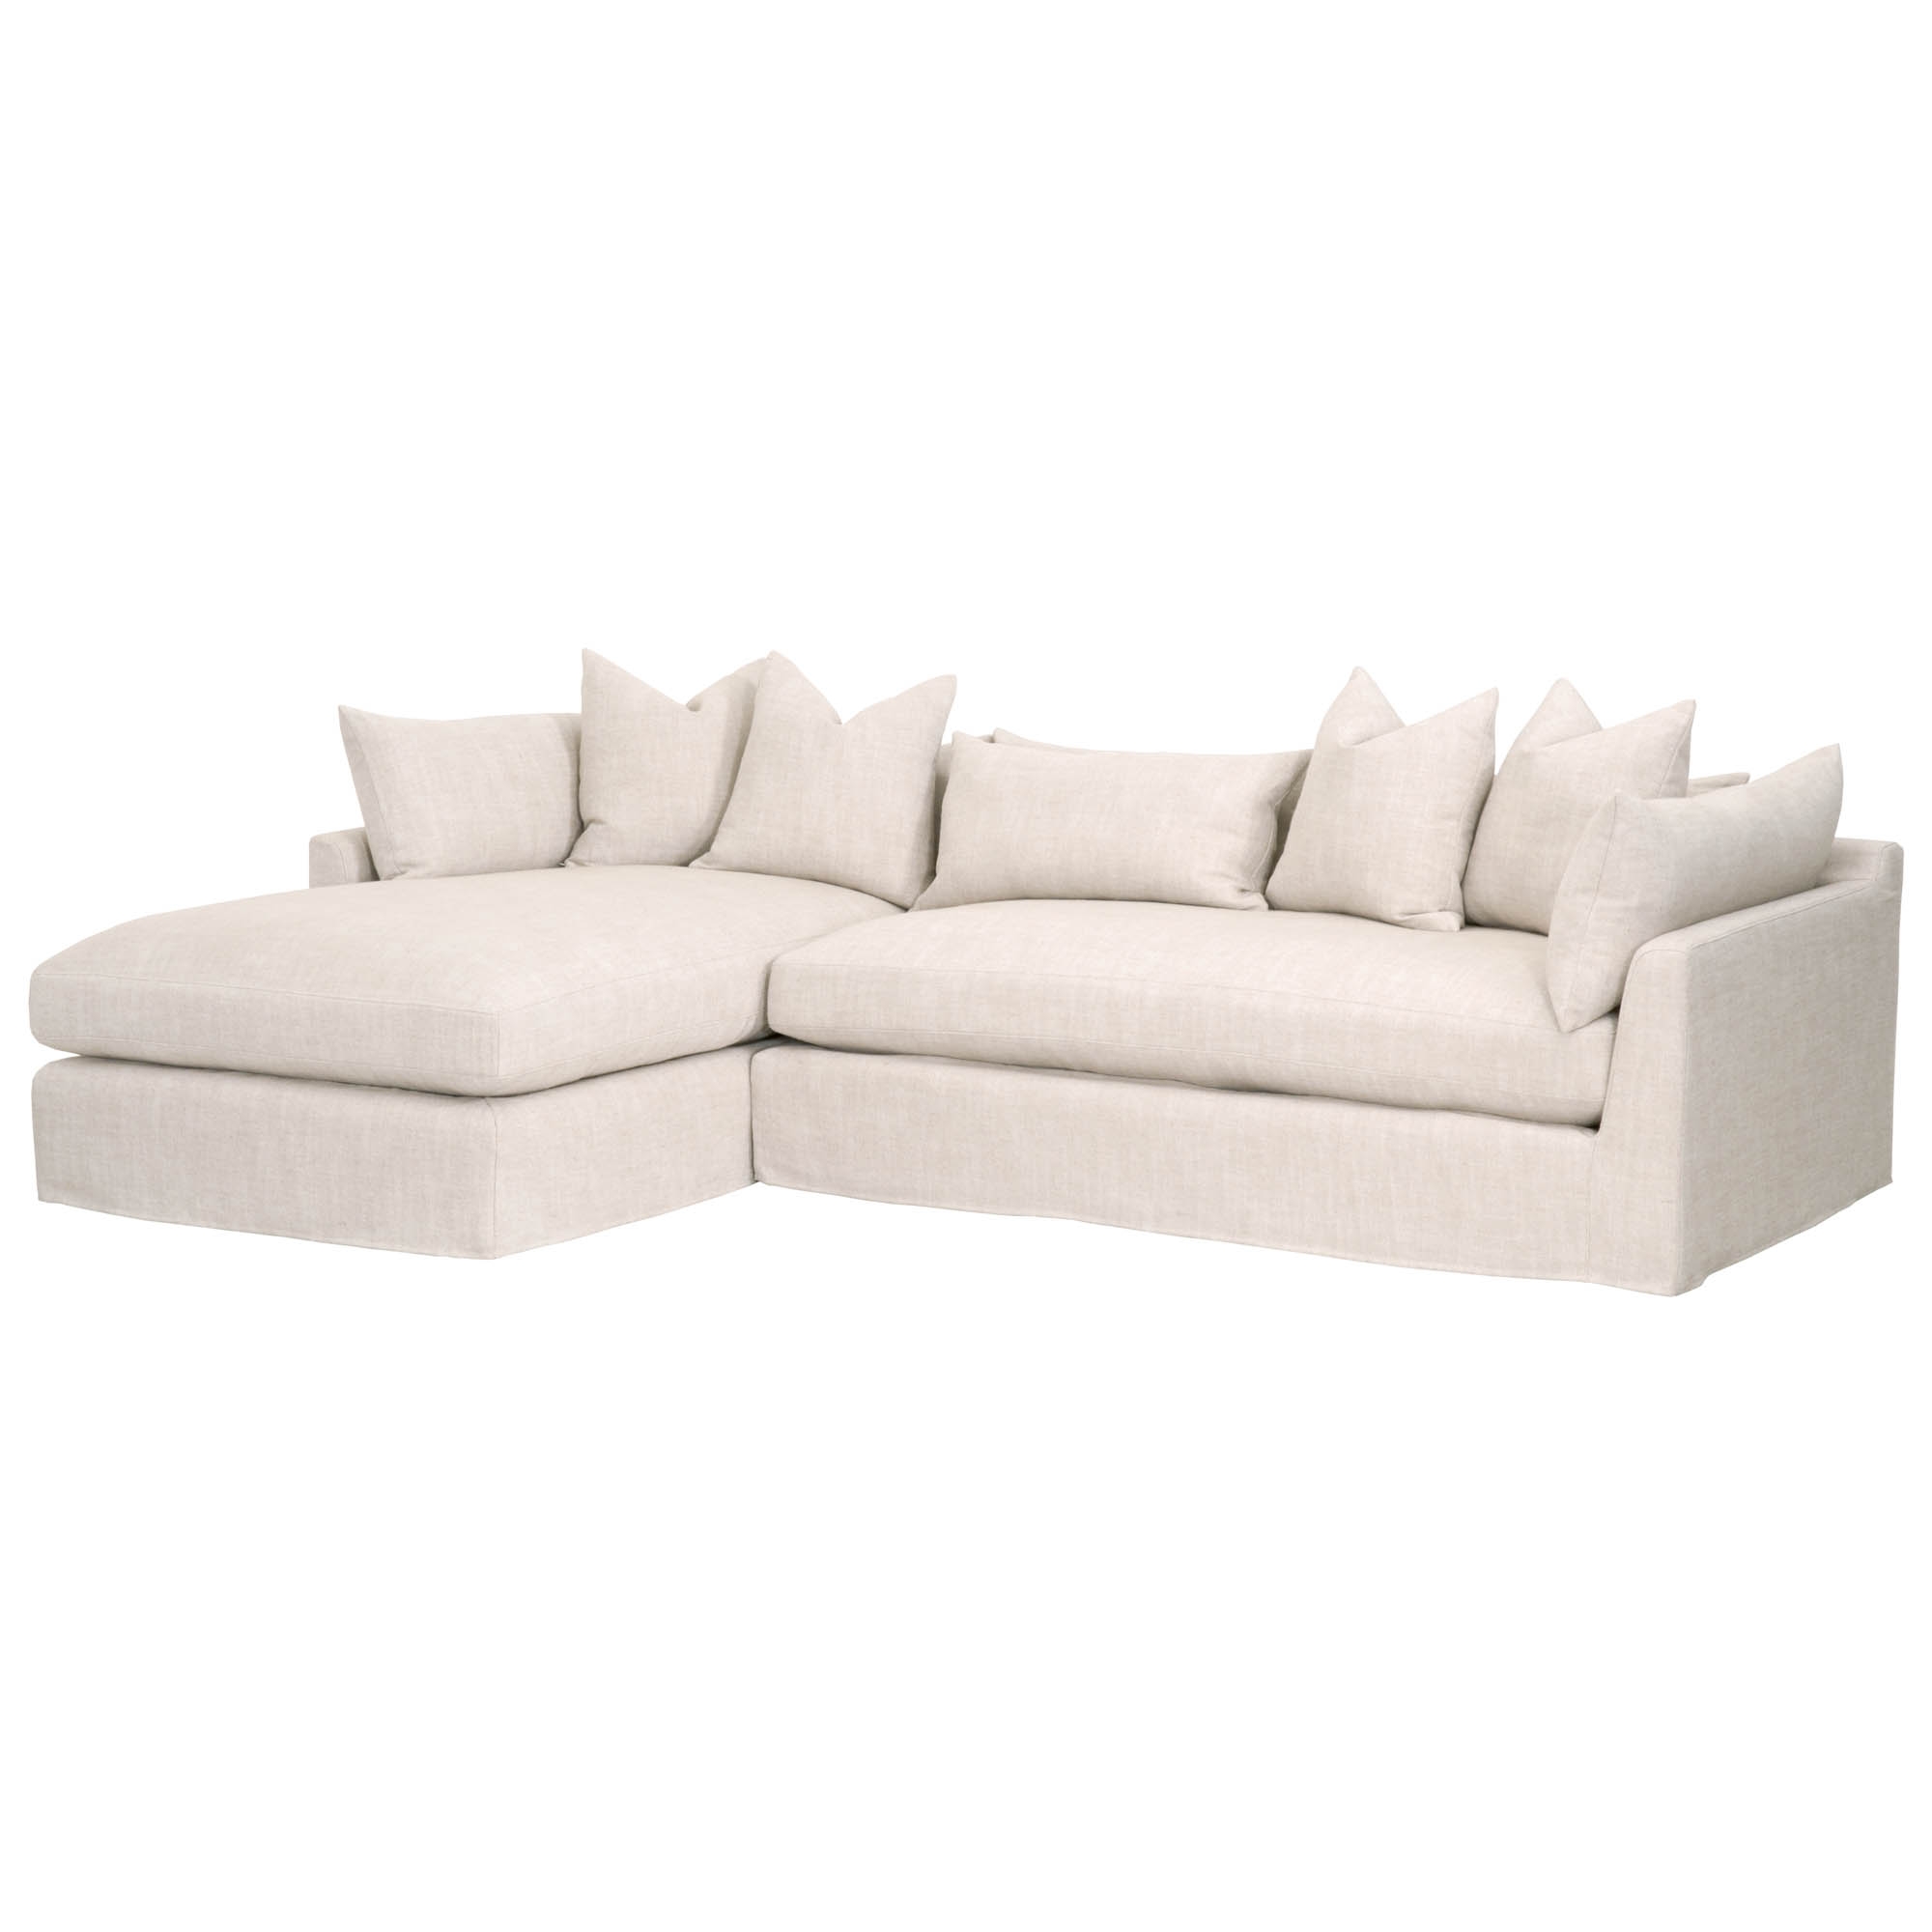 Ridley 110" Left Facing Lounge Slipcover Sectional, Bisque, Espresso - Image 1